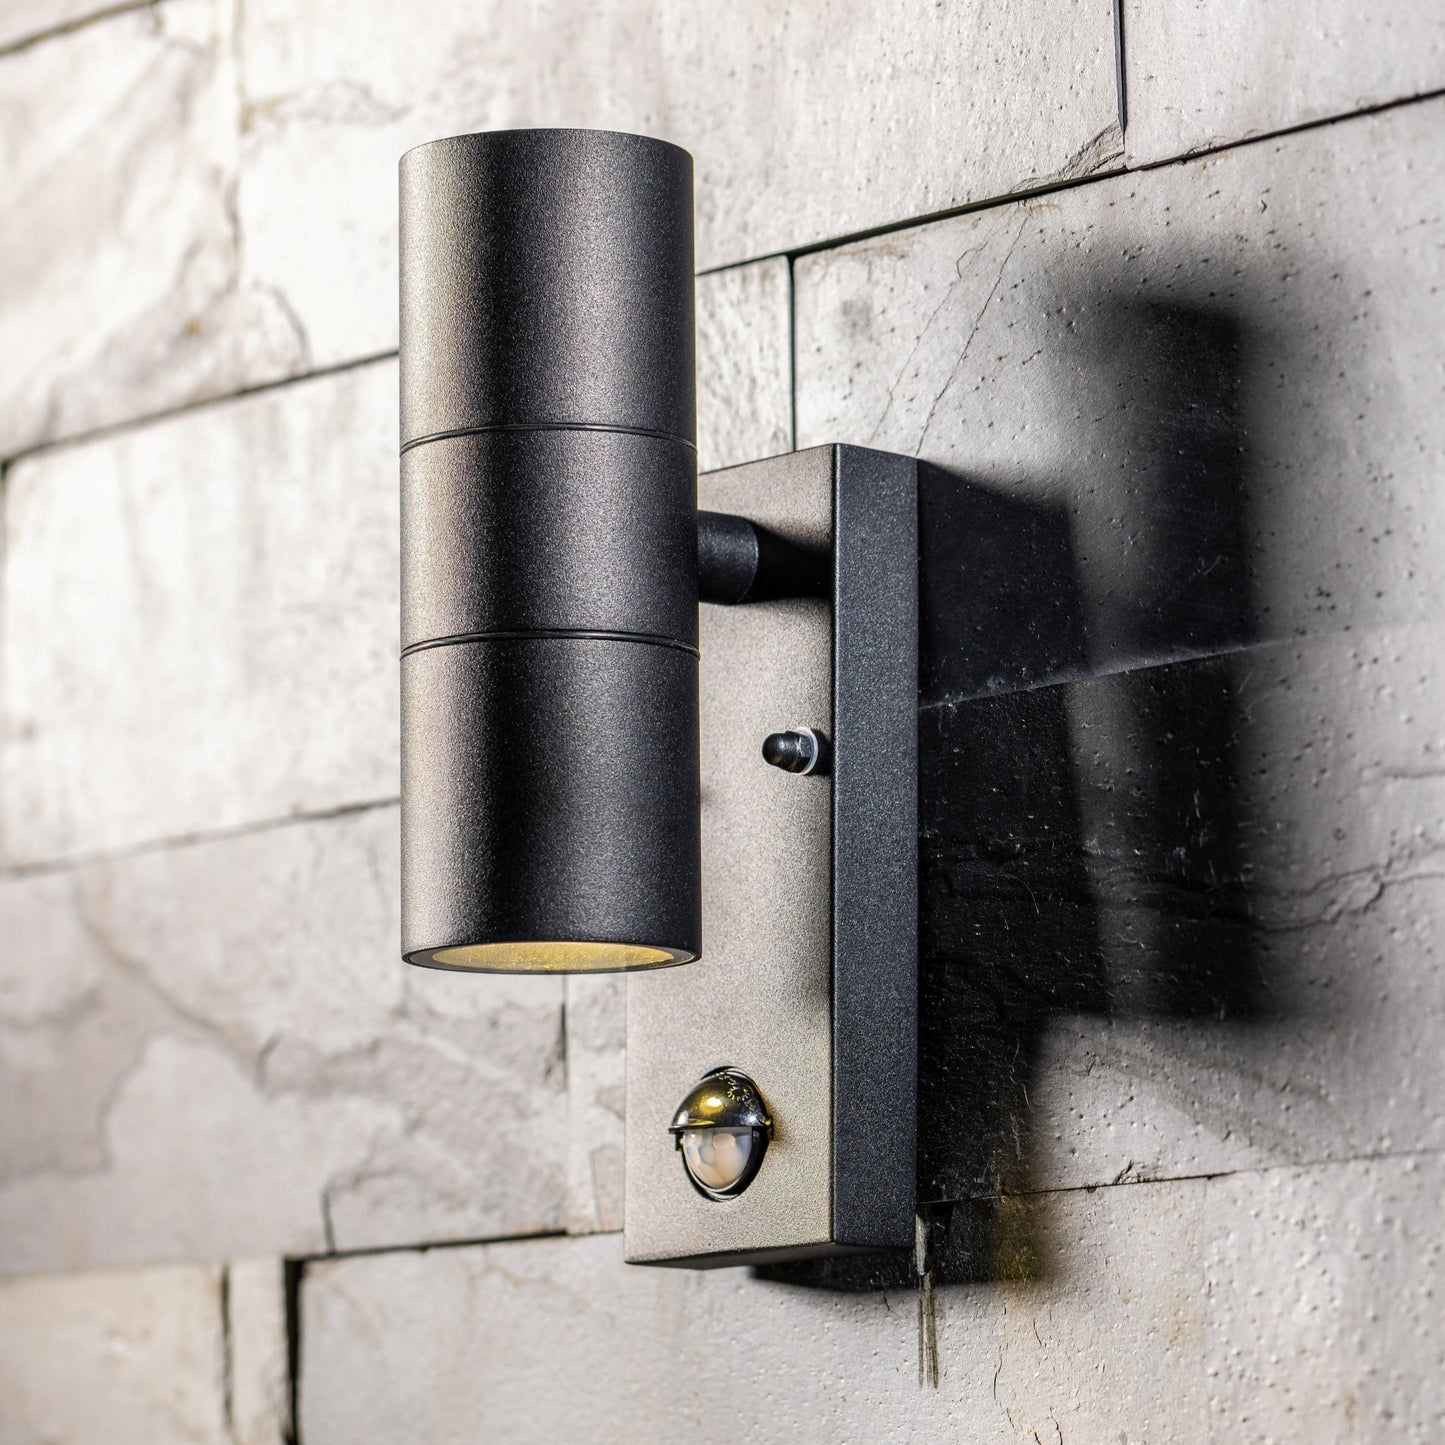 Our Leon outdoor single down light is modern and stylish in its appearance.  It comes in a cylinder design mounted on a rectangle back plate complete with clear glass diffuser and built in PIR motion sensor. It is designed for durability and longevity with its robust material producing a fully weatherproof and water resistant light fitting